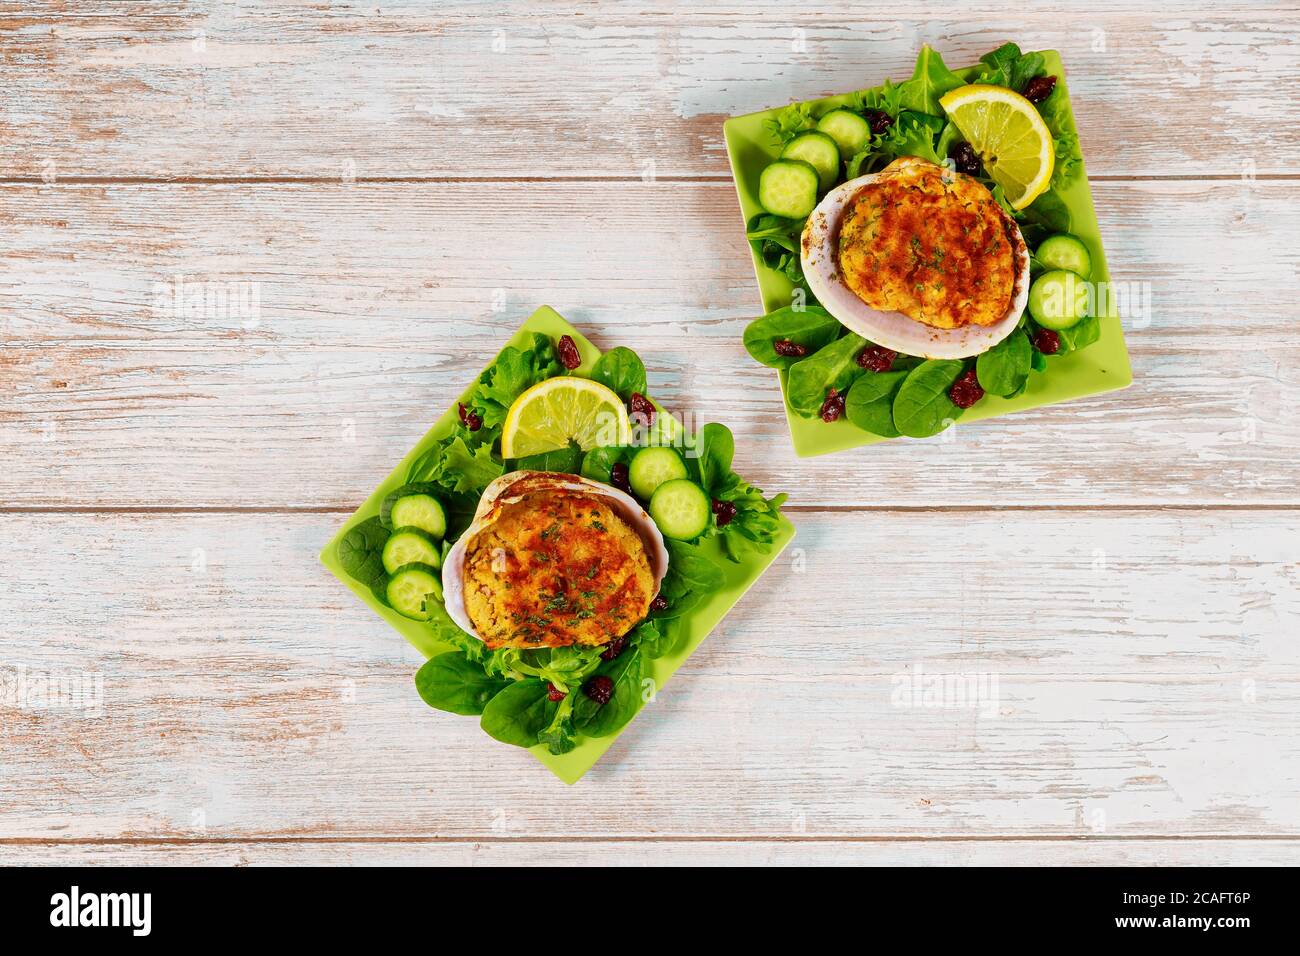 Seafood dish with stuffed clams and fresh salad on wooden background. Stock Photo